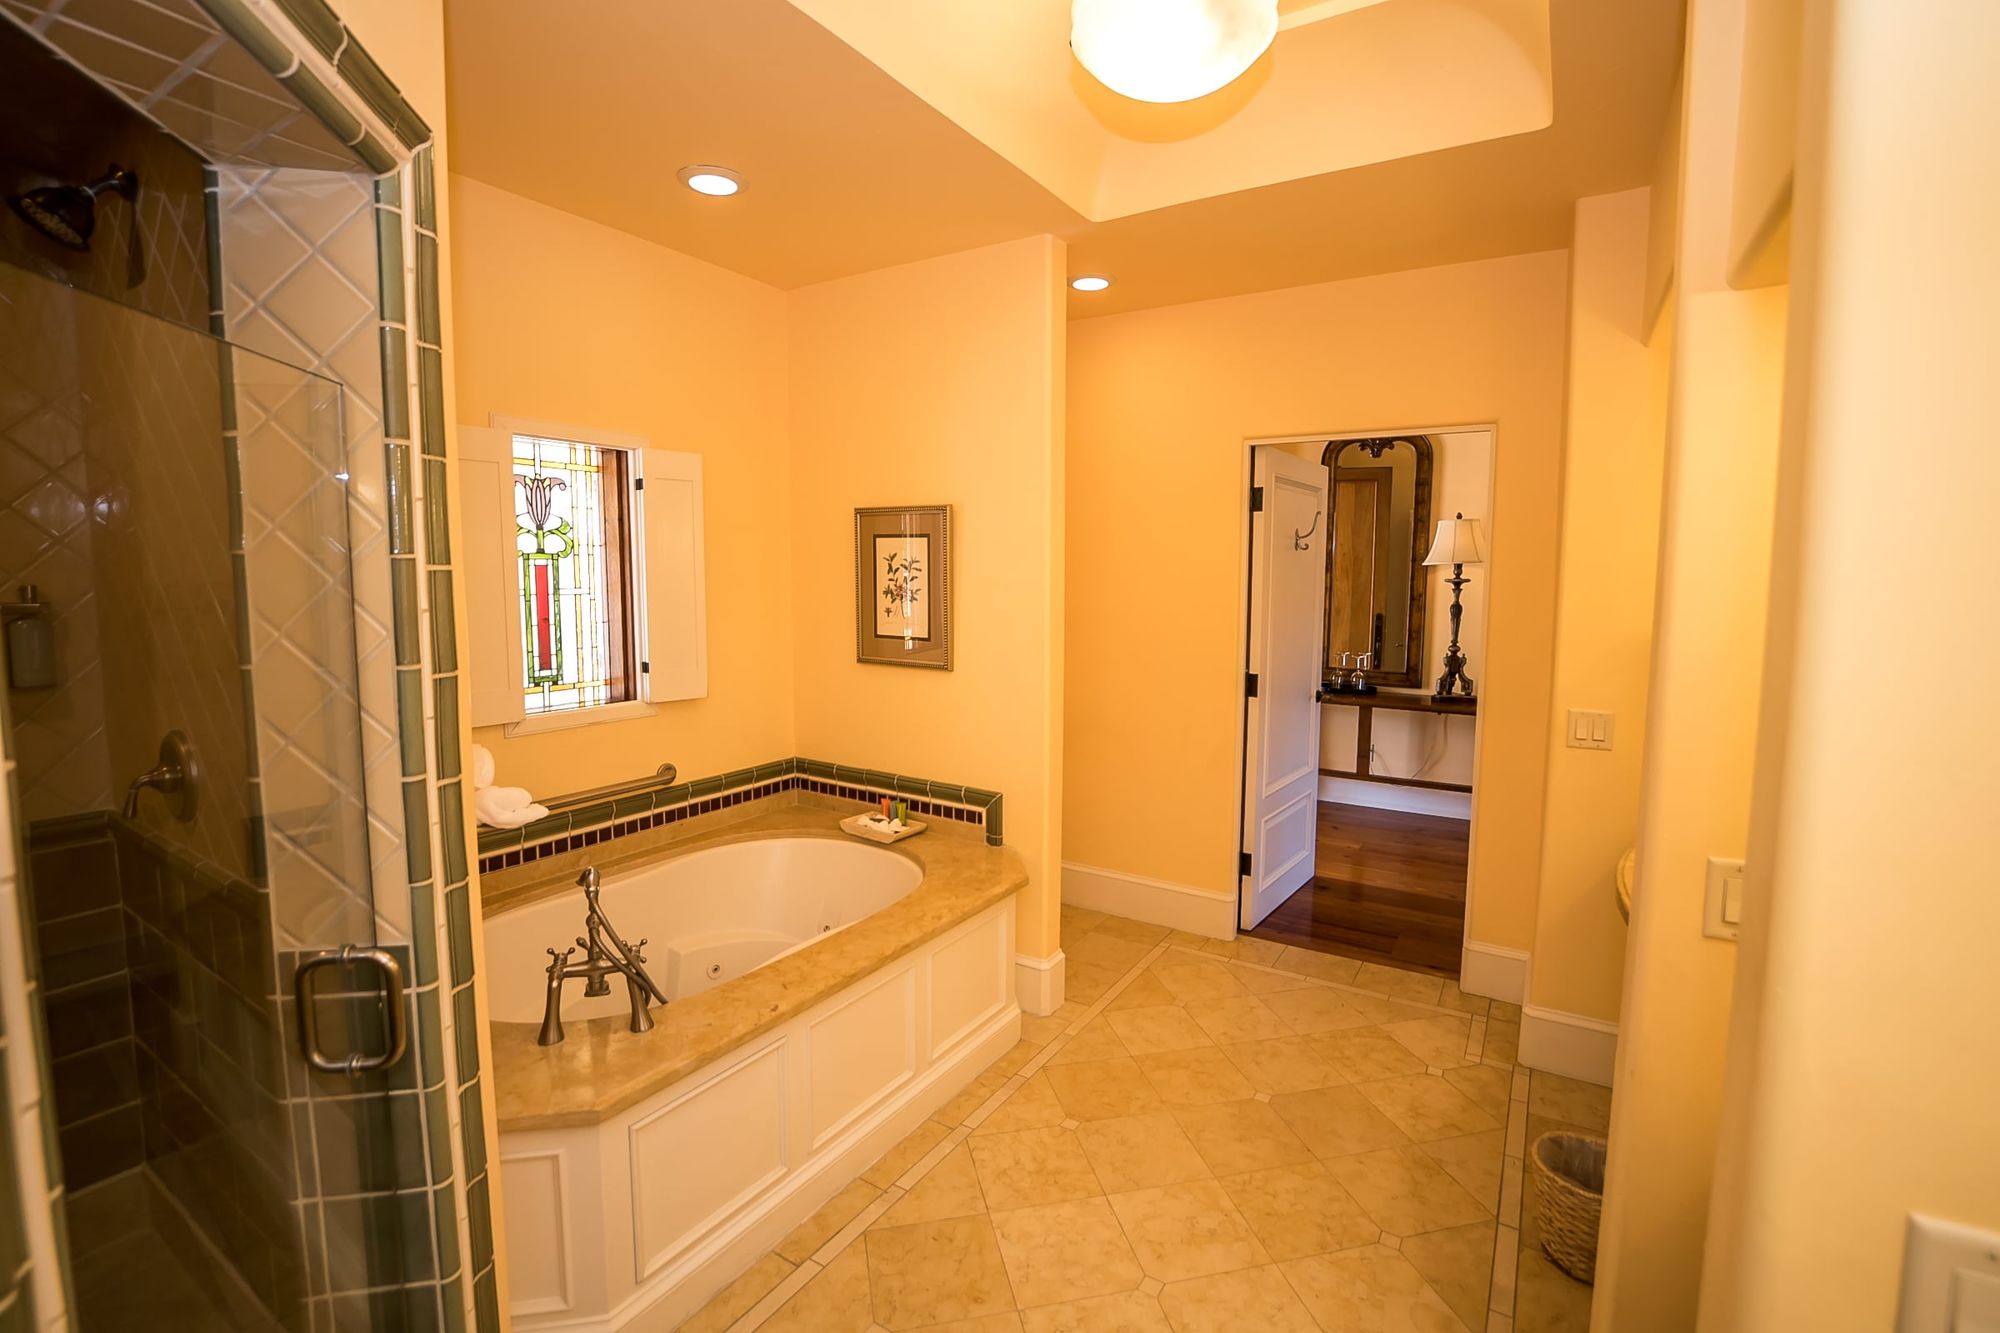 Hall with bathtub to the left and door to hallway at the end